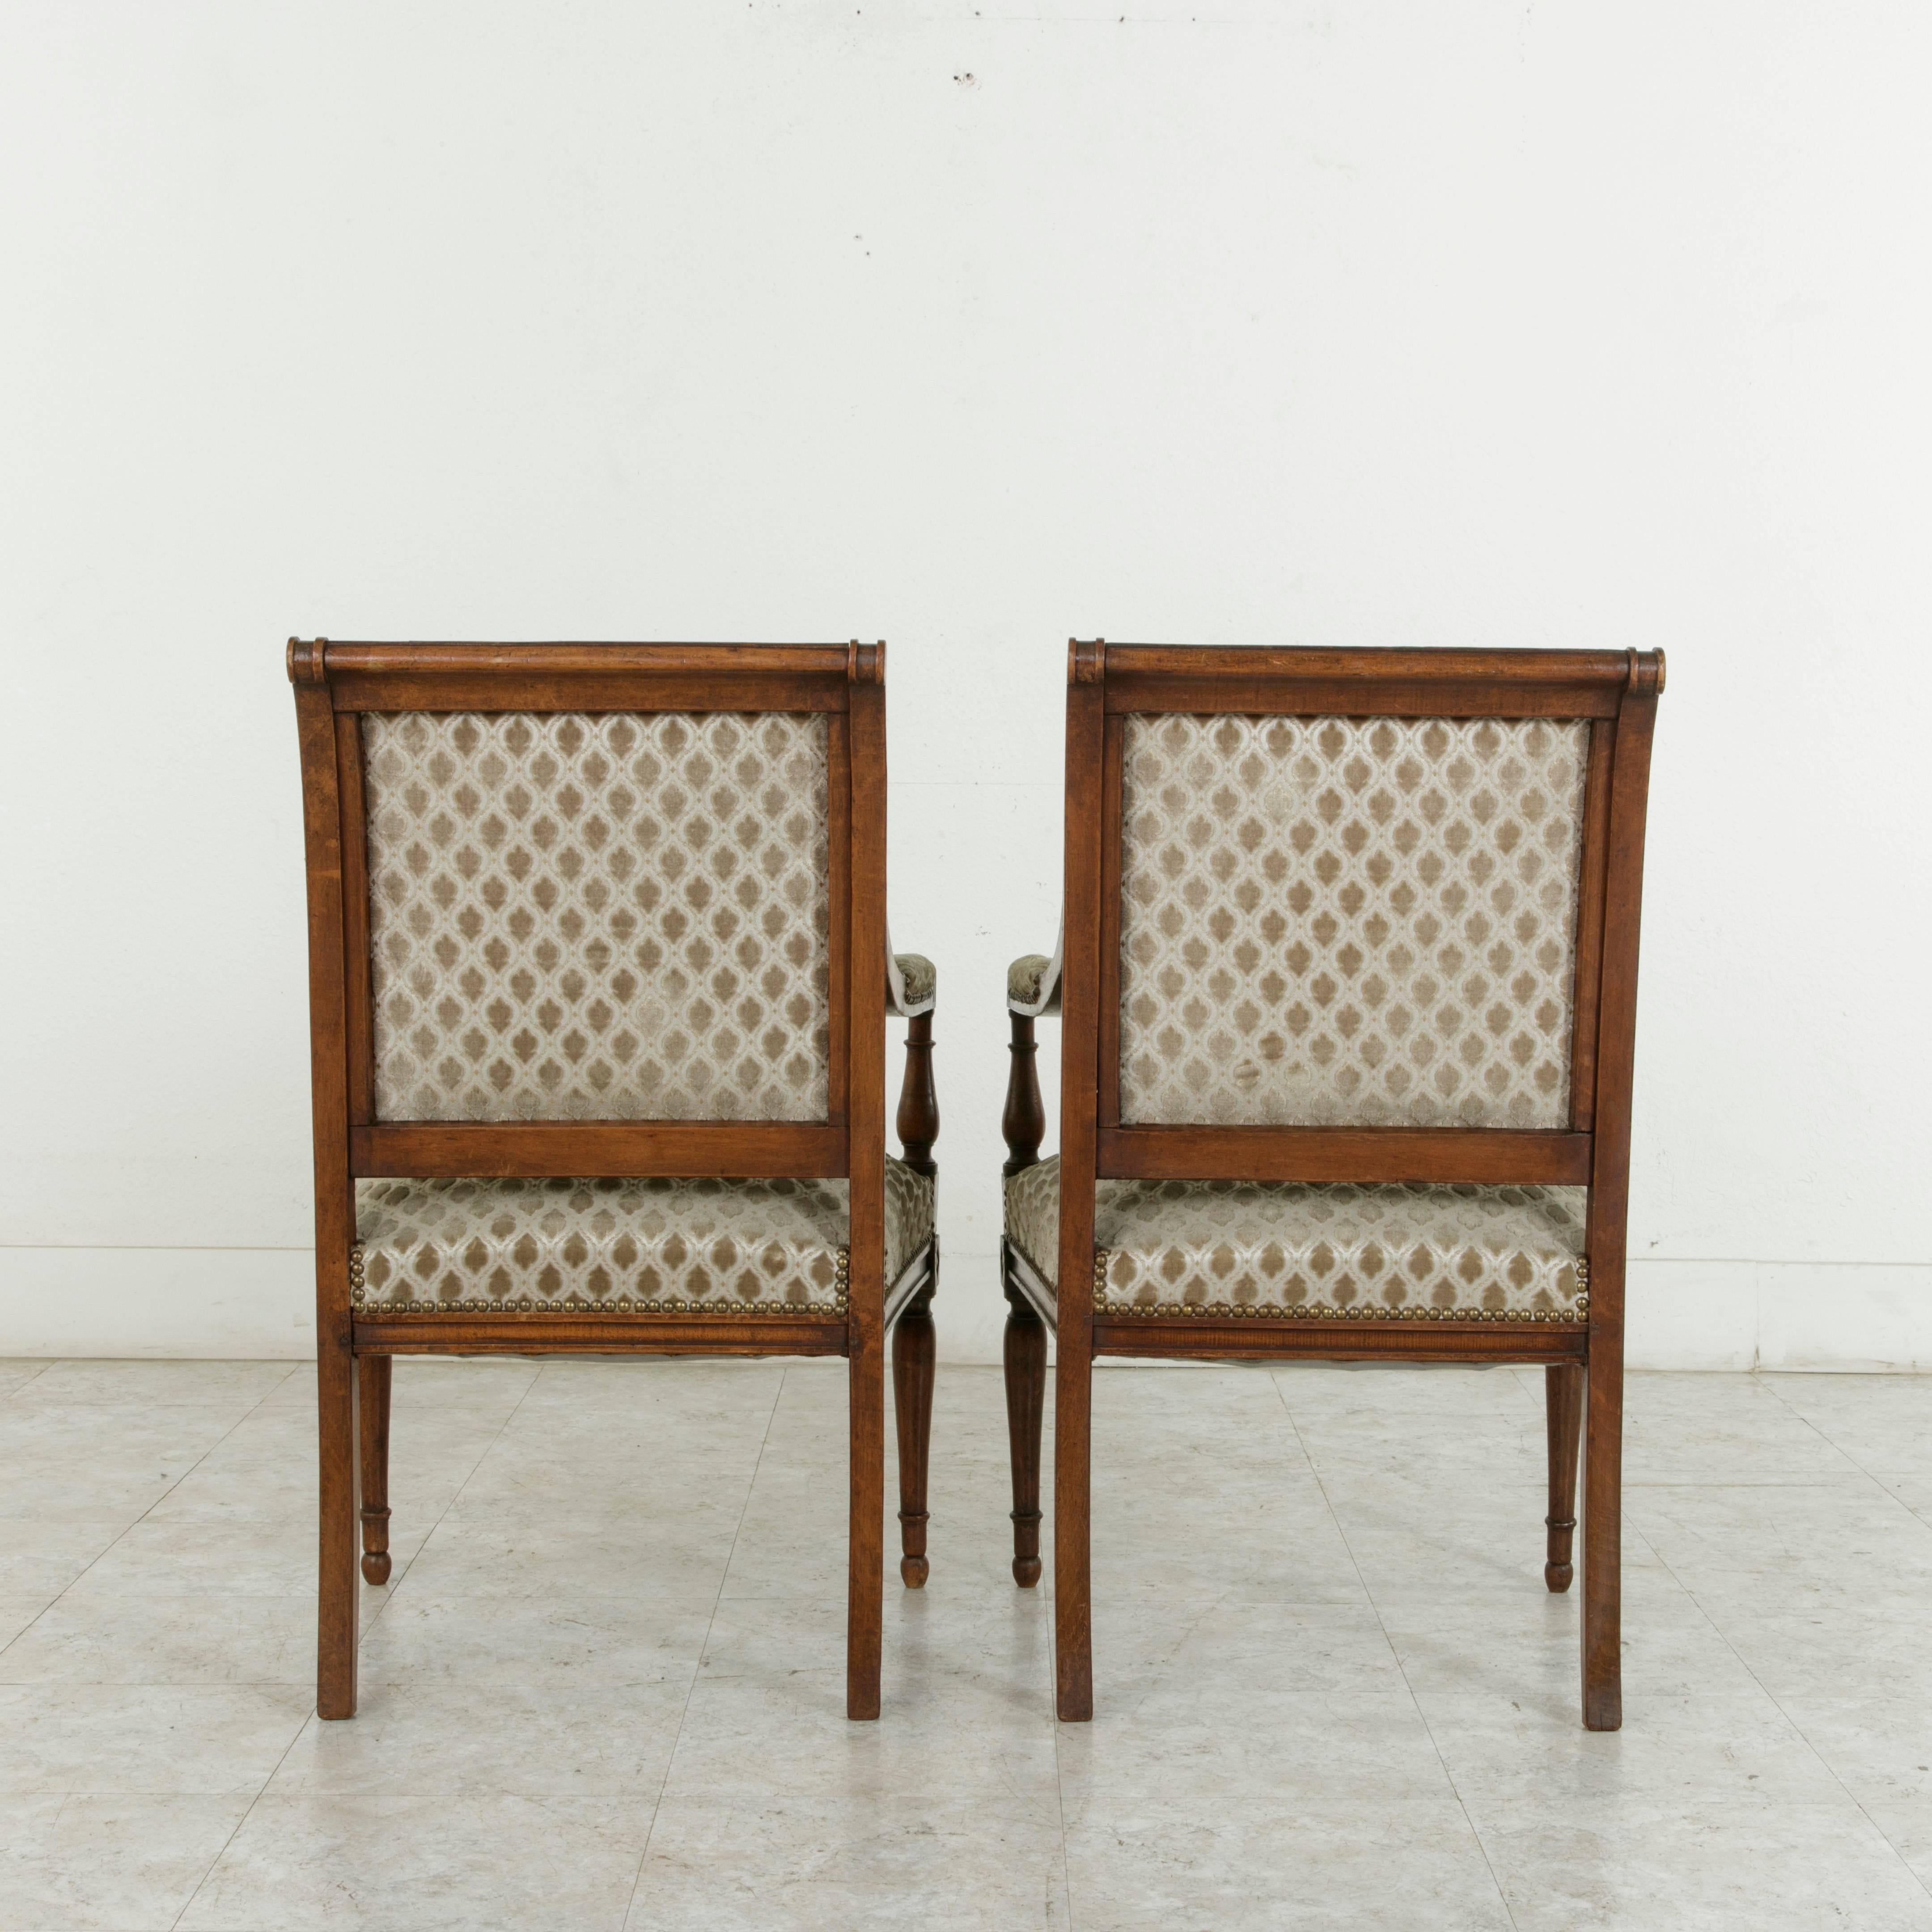 Early 19th Century Pair of French Directoire Period Hand-Carved Walnut Armchairs, circa 1800